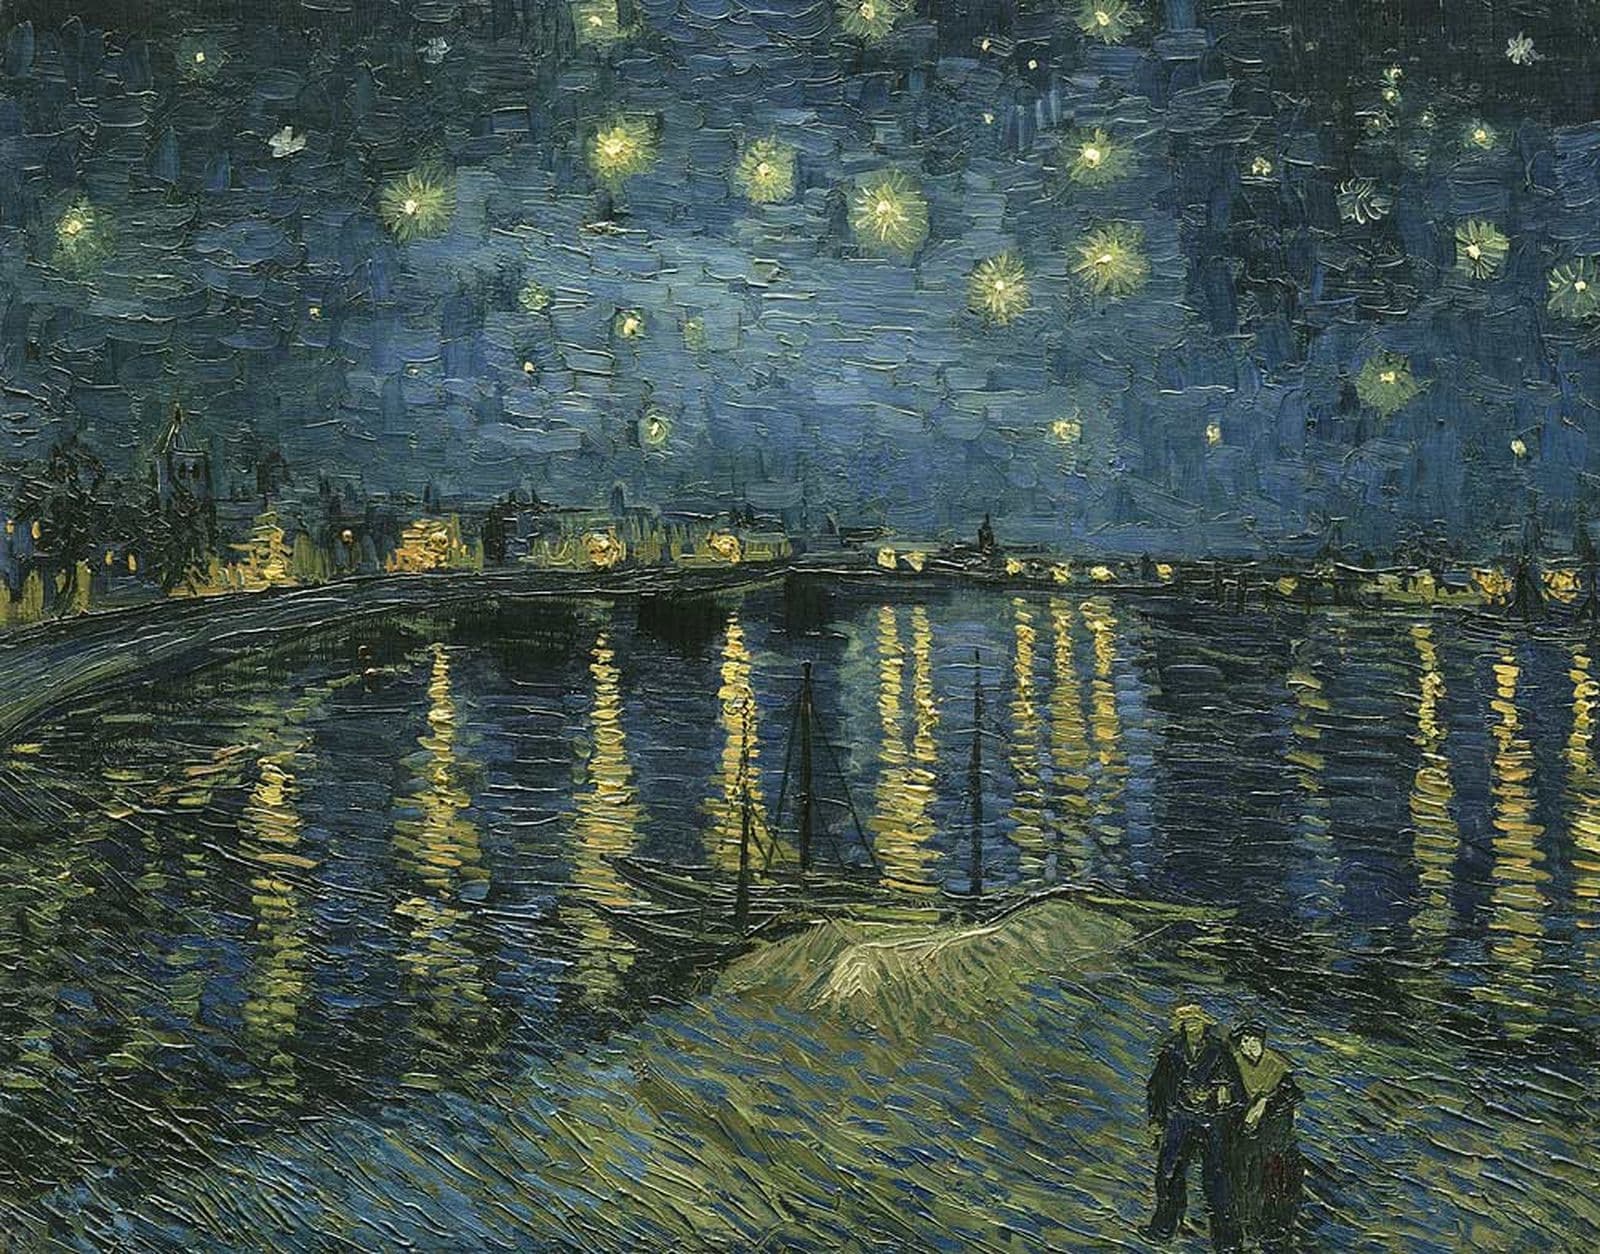 An impressionistic painting of a night sky over water, with bright yellow stars